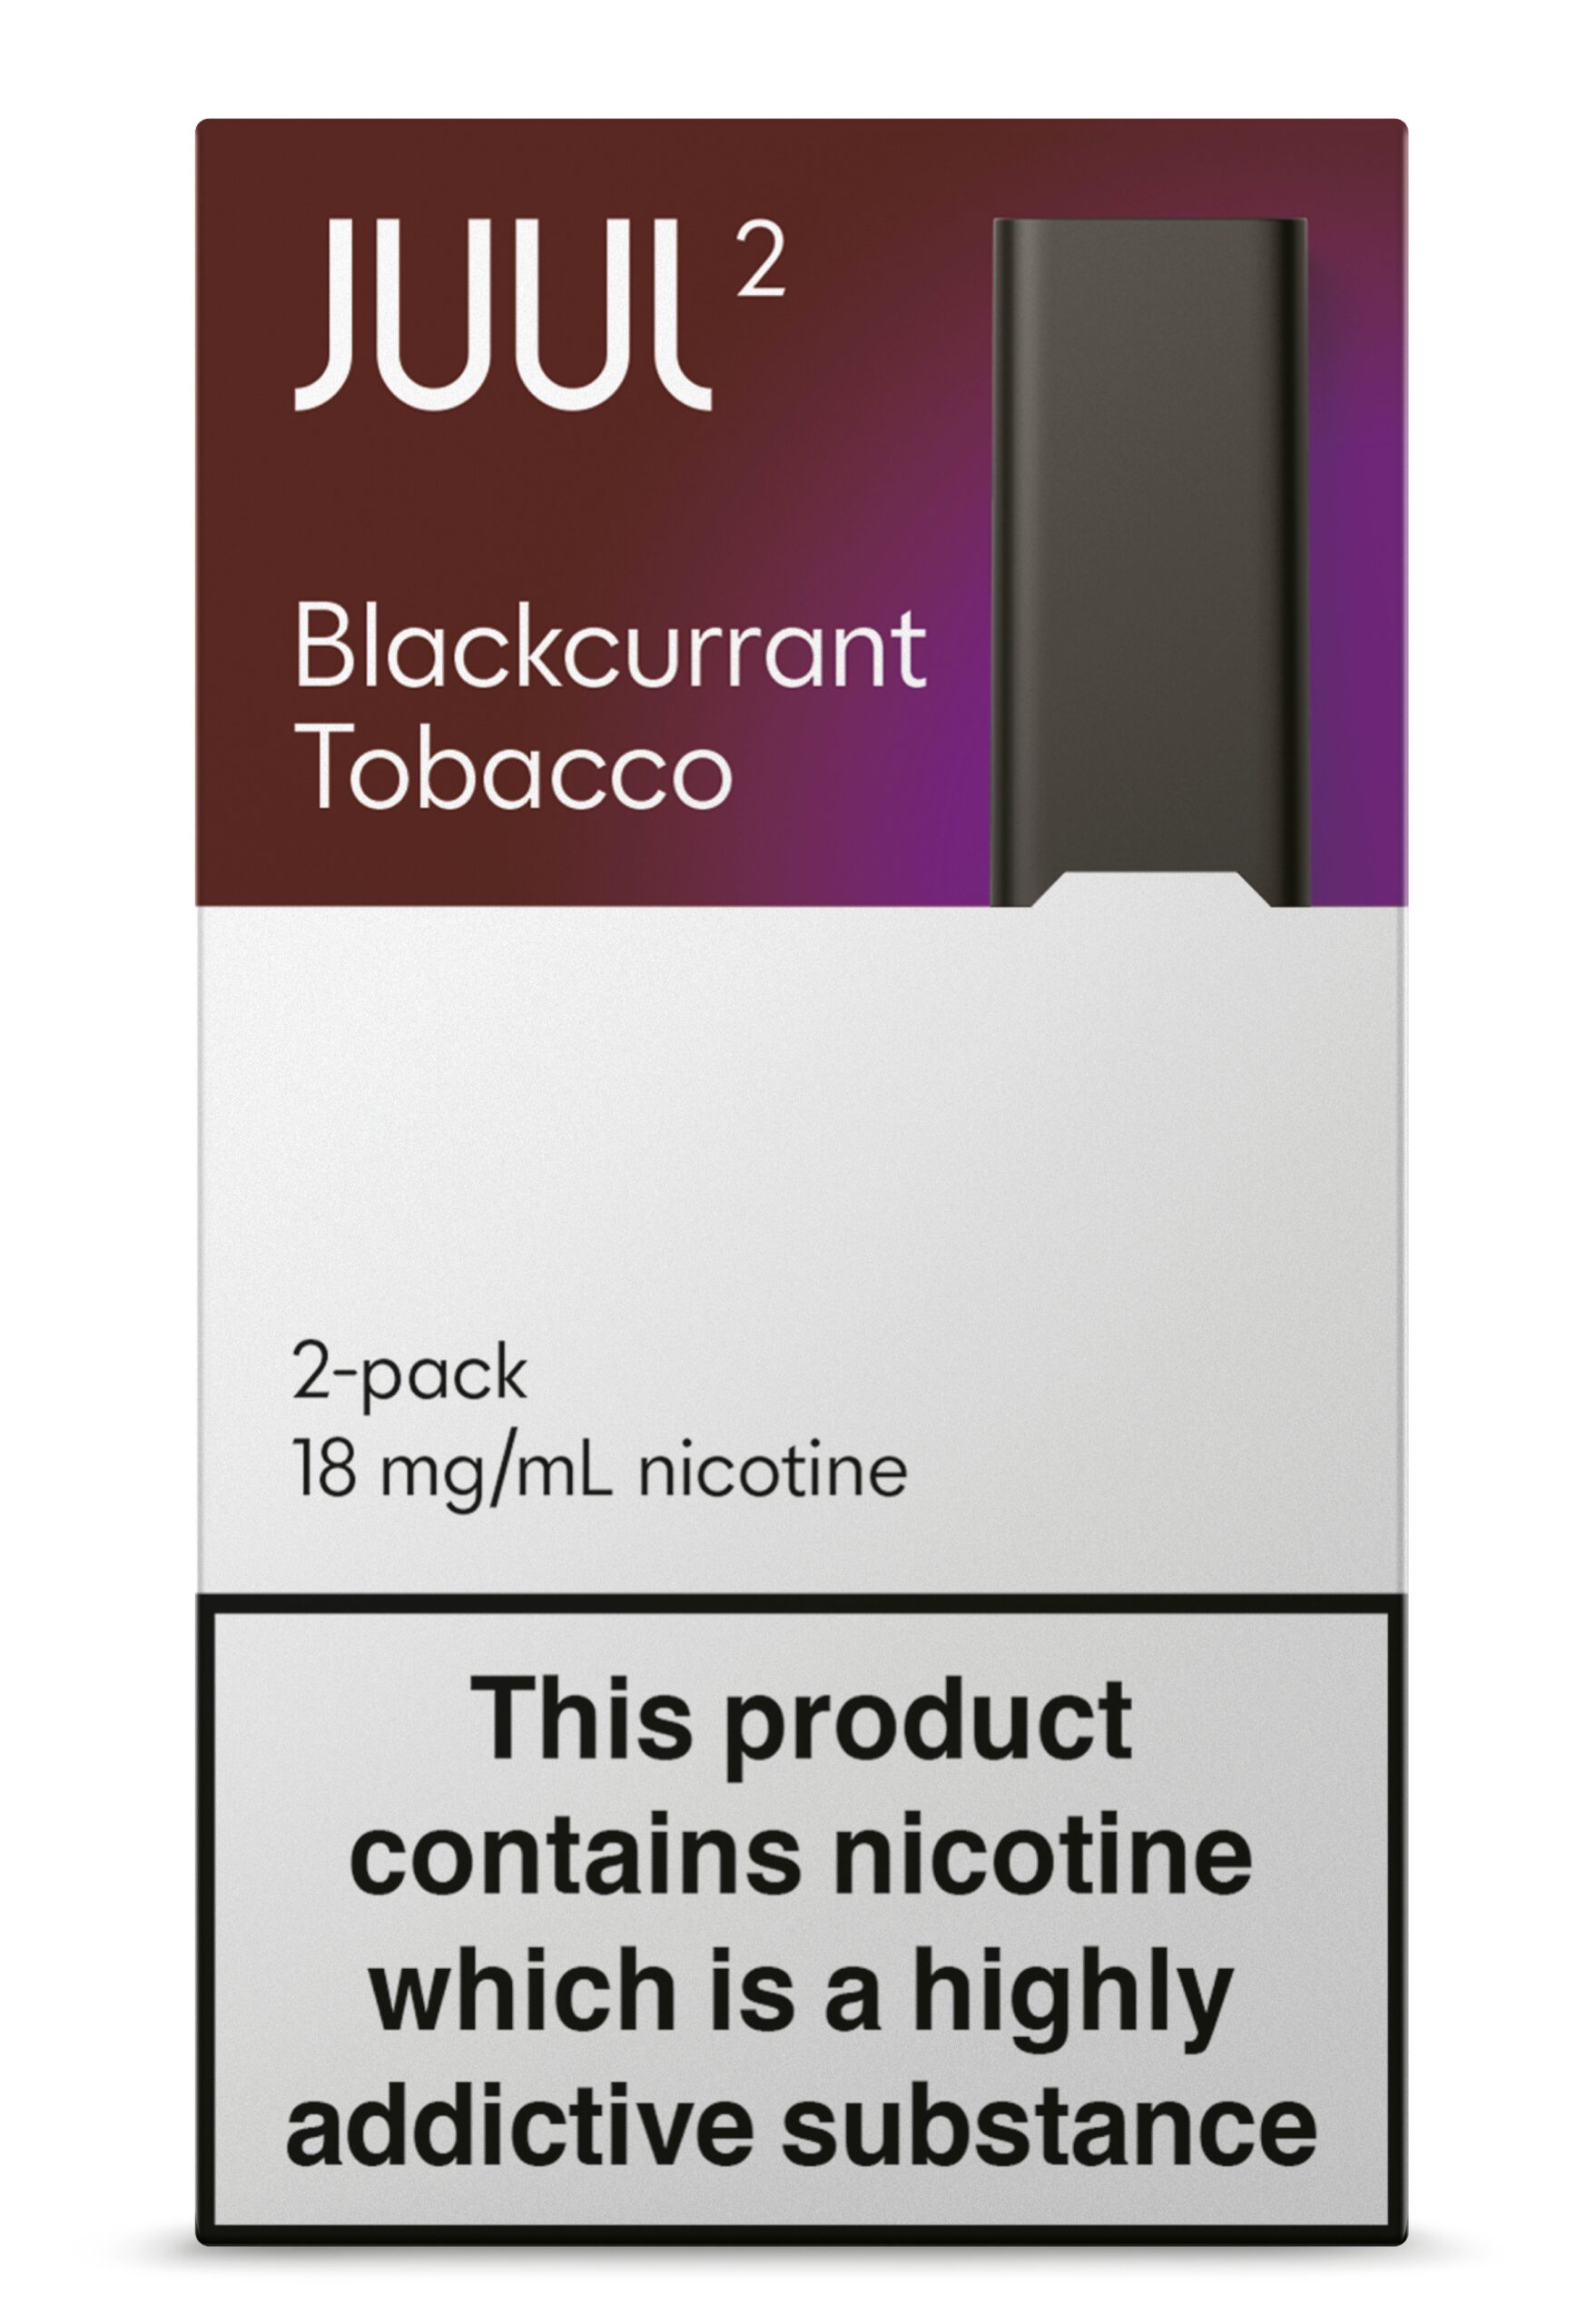 Juul2 wins Product of the Year and launches Blackcurrant Tobacco pods